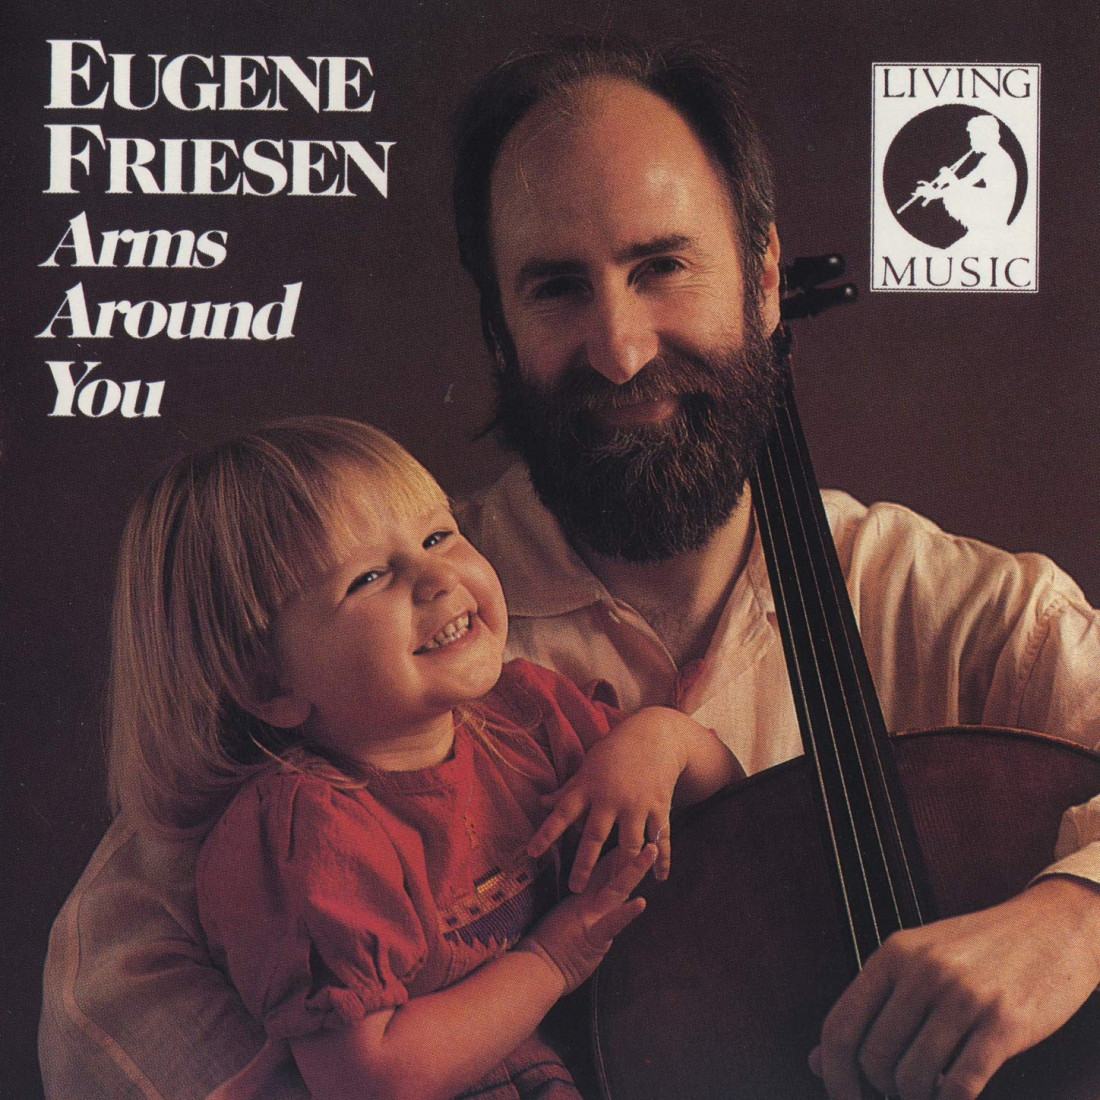 [Eugene Friesen] Remembering You (Arms aroud you) Photo-Image